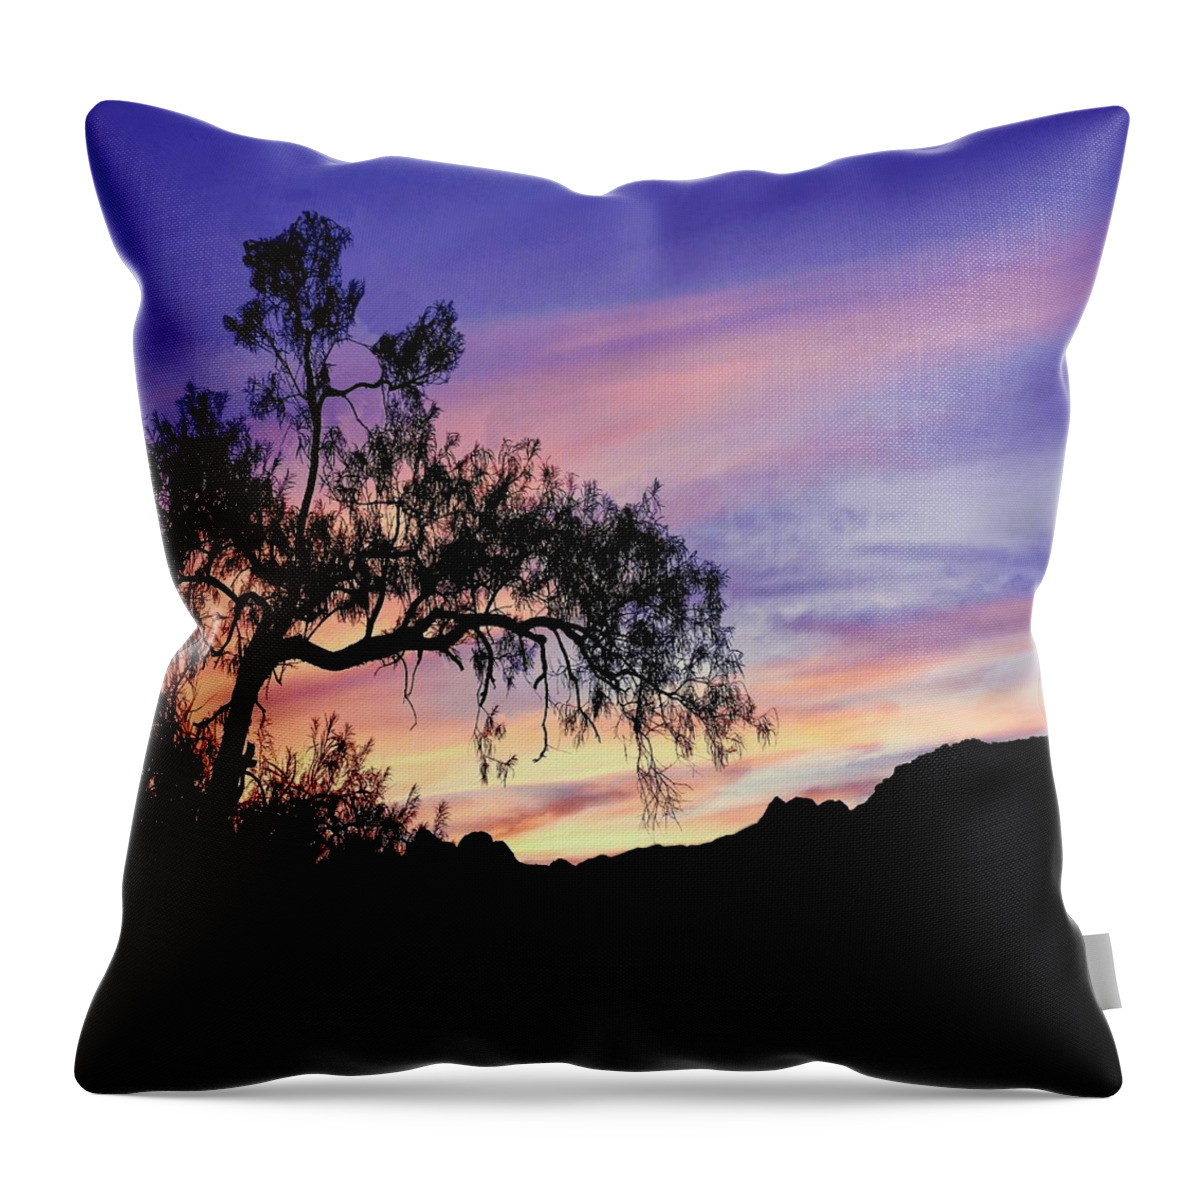 Desert Throw Pillow featuring the photograph Desert Tree at Twilight by Beth Myer Photography